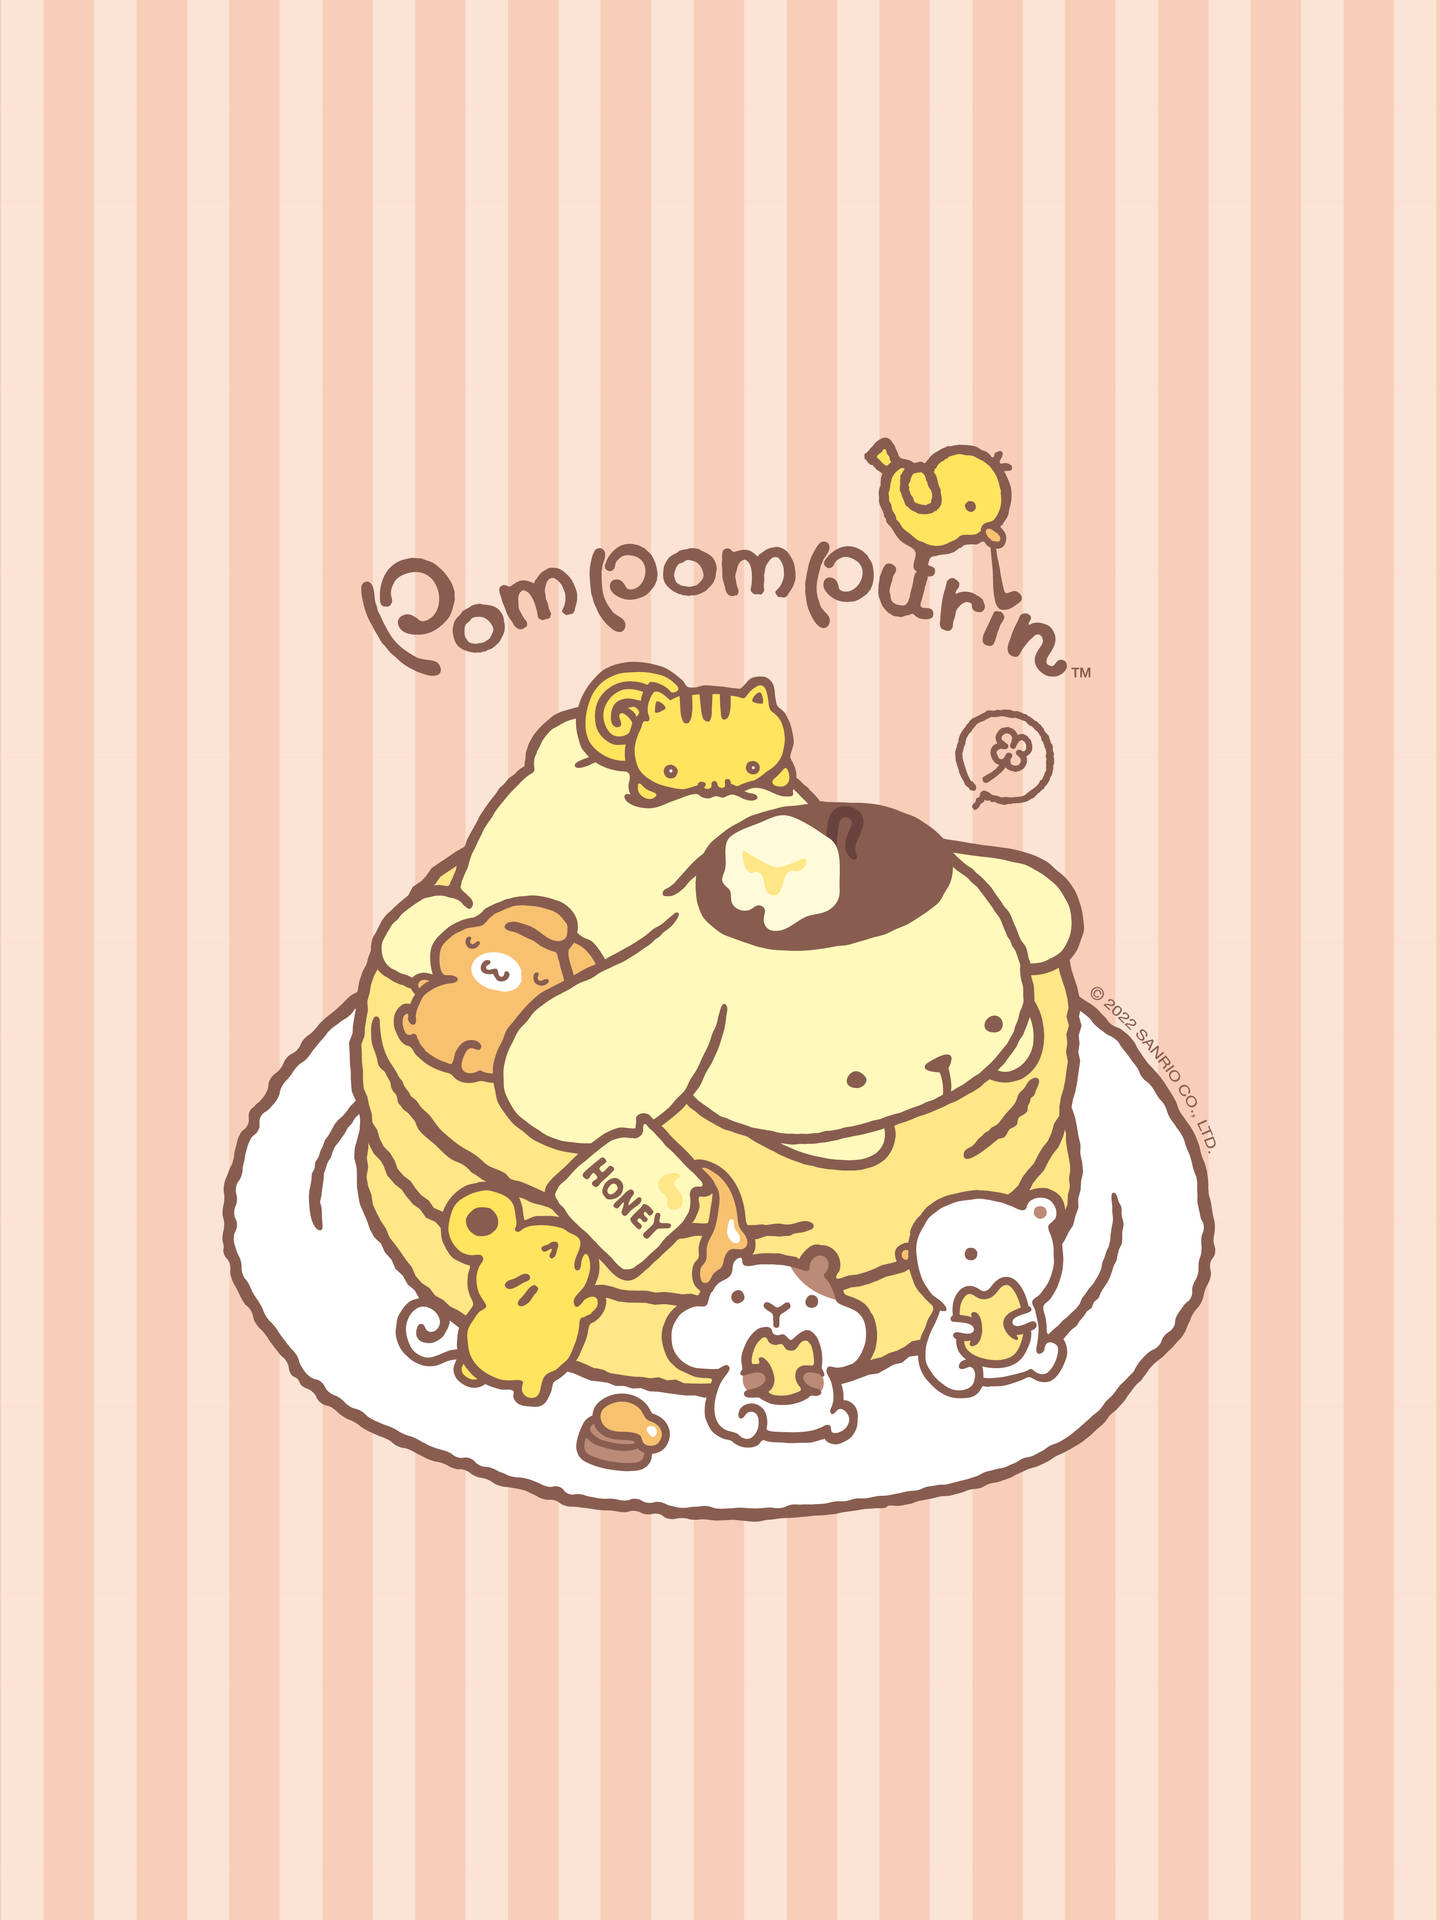 Pompompurinpancake Playtime Hd Can Be Translated To Italian As 